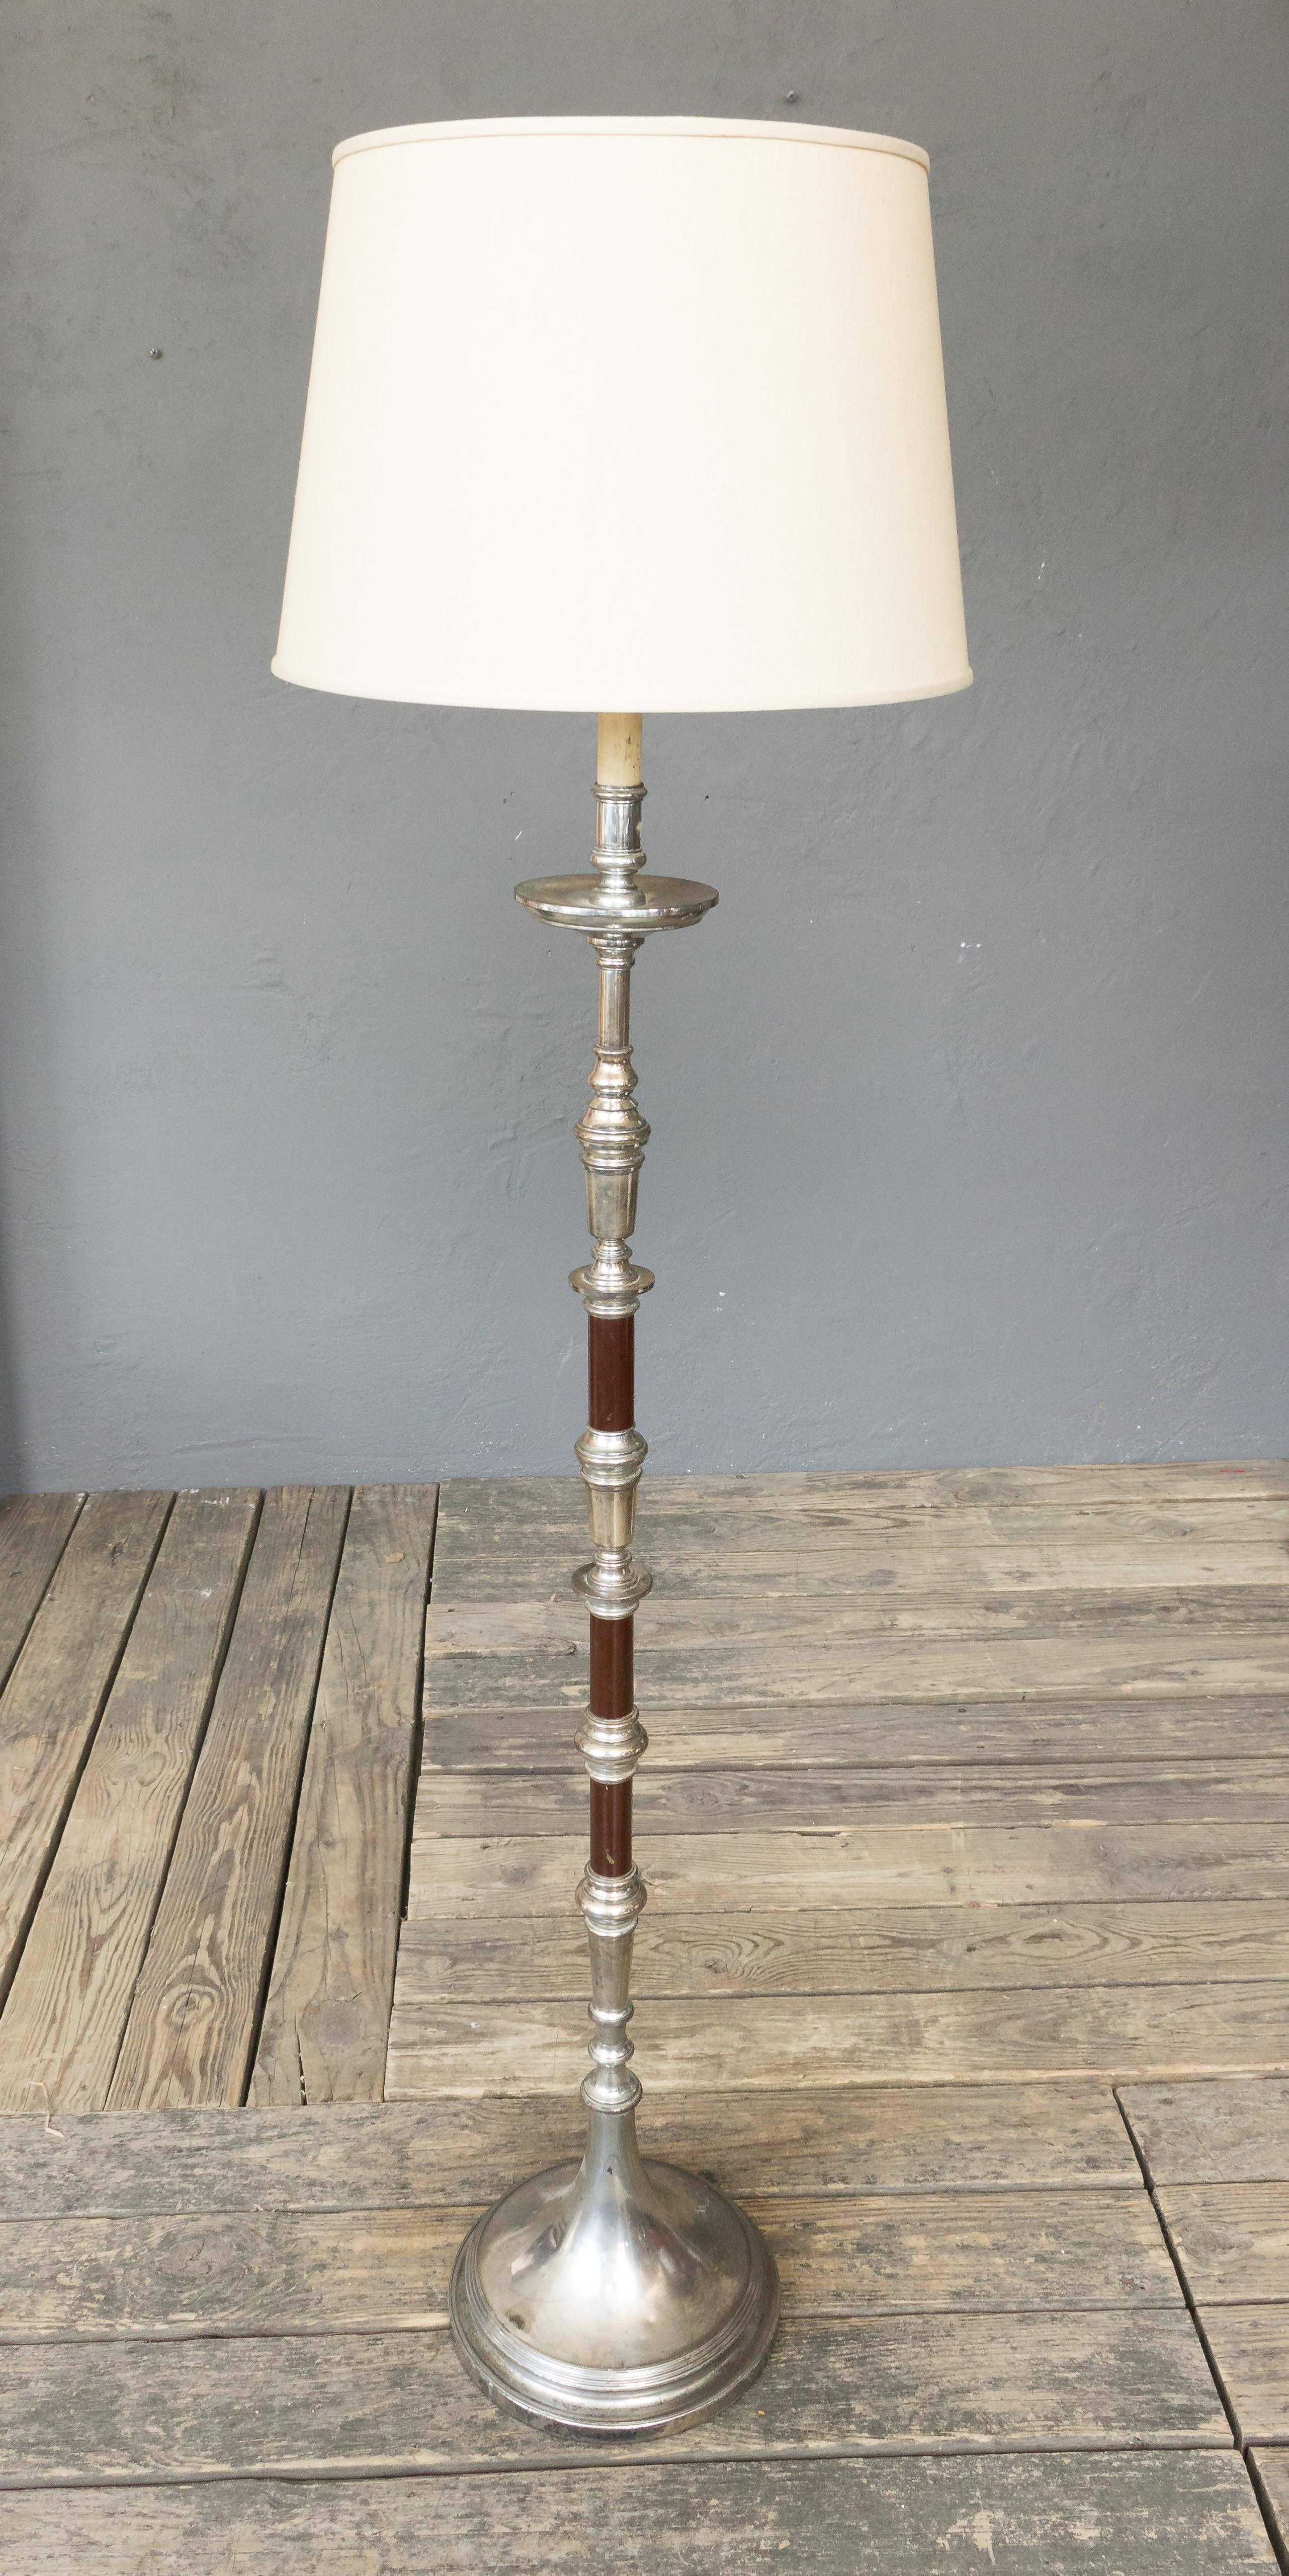 Interesting floor lamp with nickel-plated and painted burgundy color components. French, 1970s
Not sold with lampshade.
This lamp can be re-plated in either nickel, silver or brass. Pricing on request.